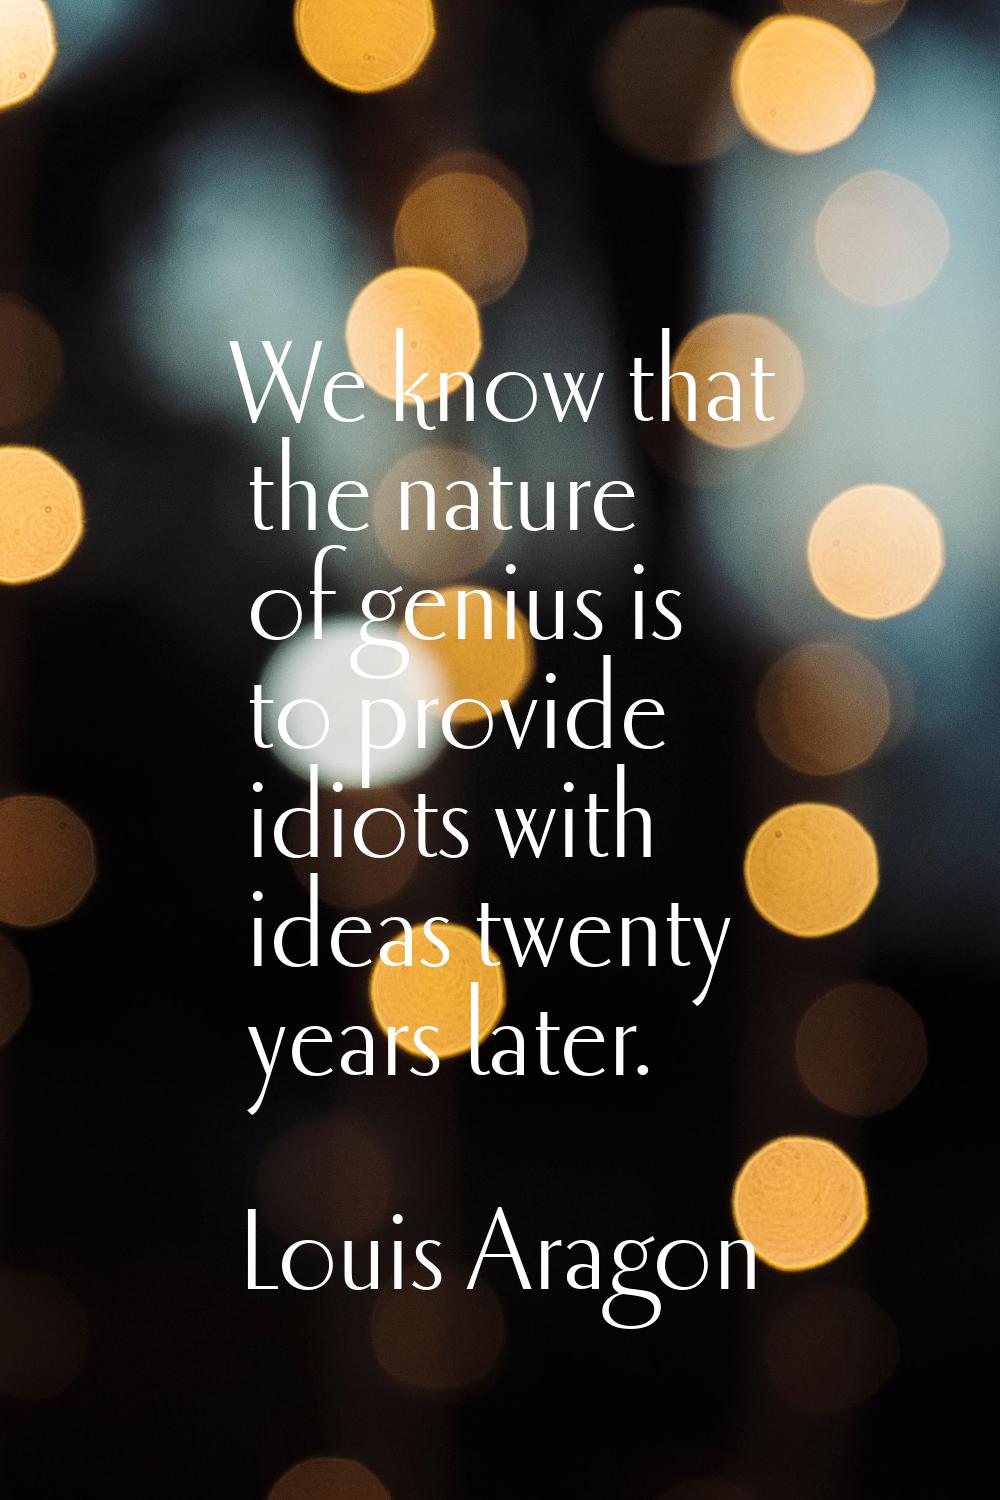 We know that the nature of genius is to provide idiots with ideas twenty years later.